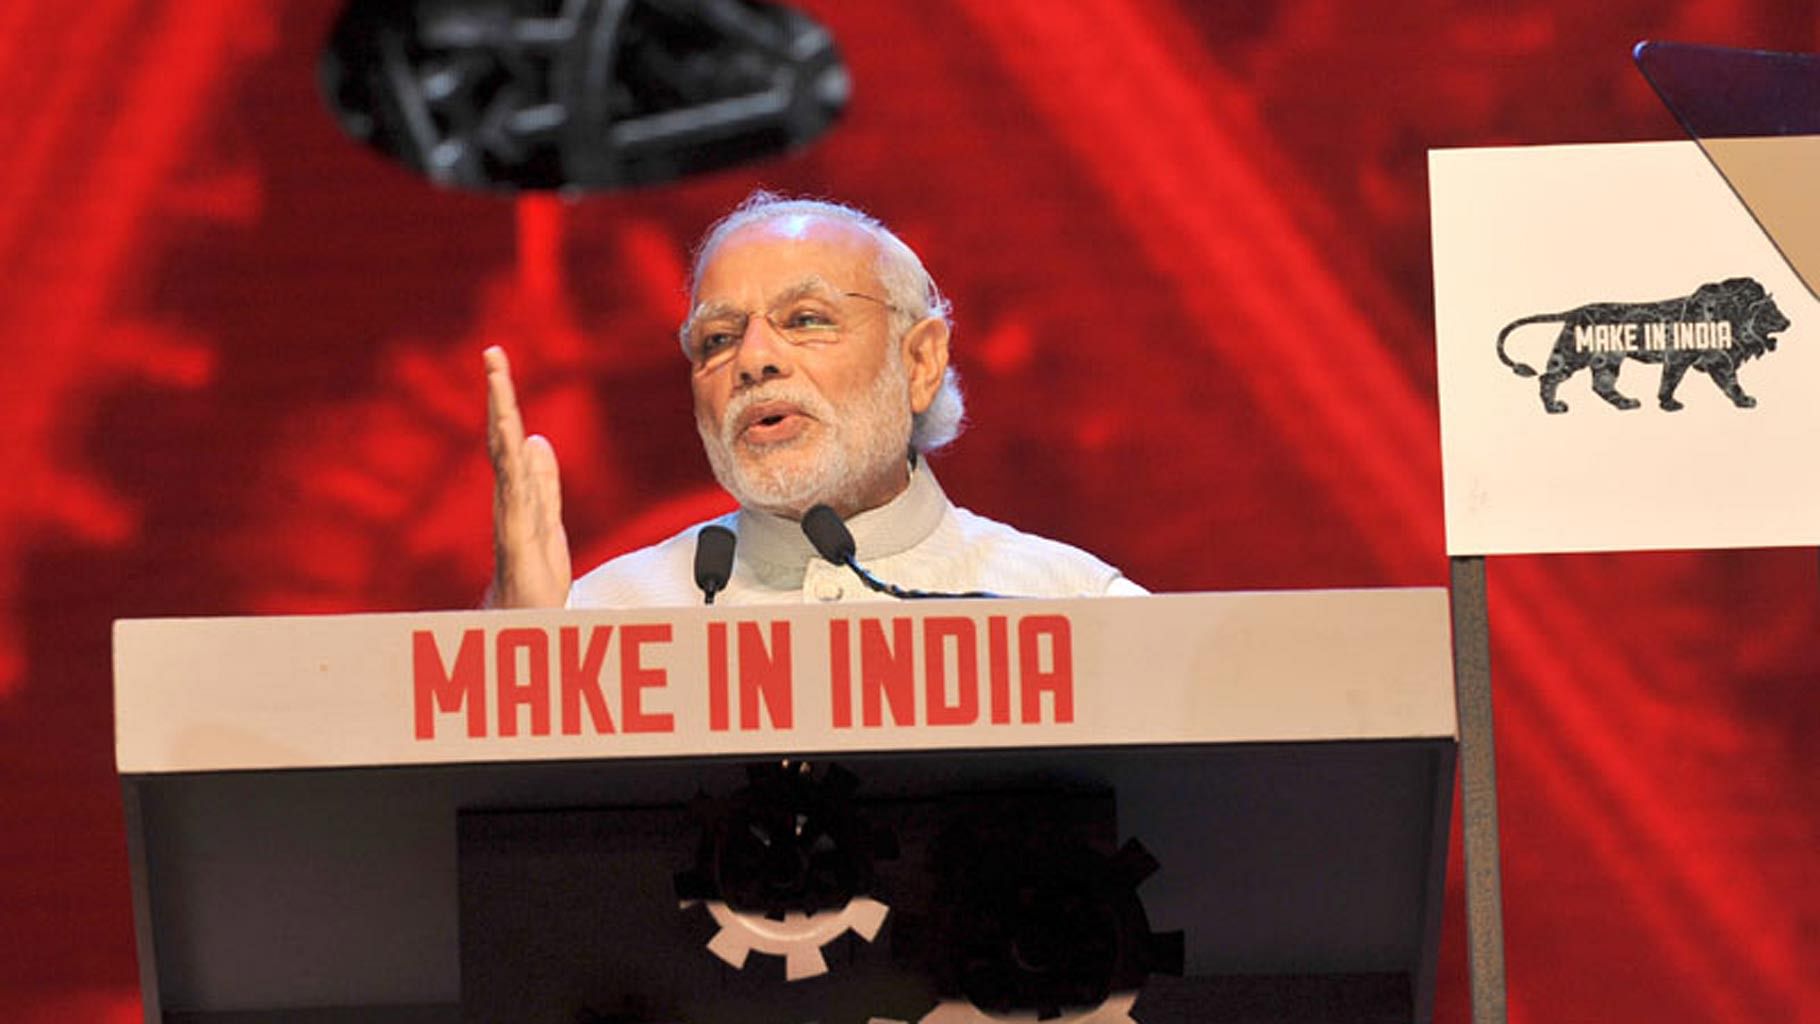  Prime Minister Shri Narendra Modi addressing at the inauguration of the Make in India Week, in Mumbai on 13 February, 2016. (Photo Courtesy: <a href="http://pib.nic.in/newsite/photo.aspx">PIB</a>)